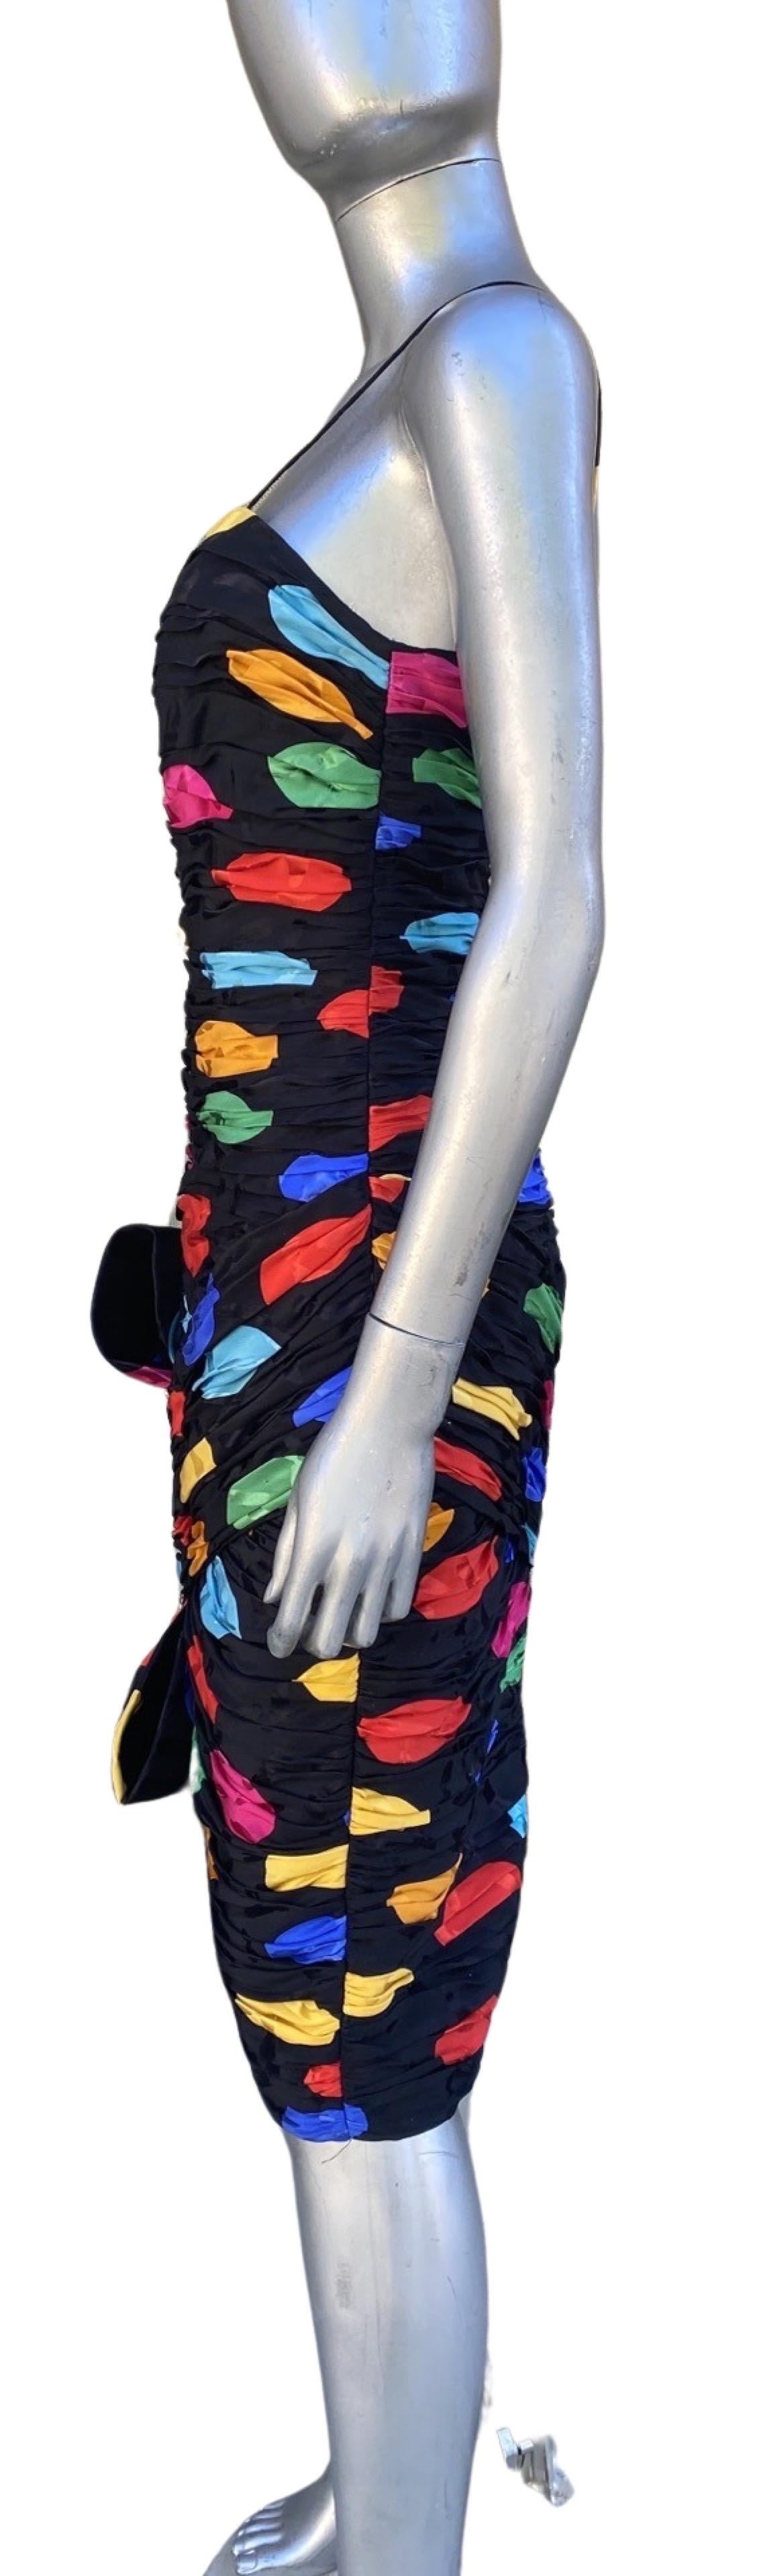 Vintage Spectacular Fred Hayman BH Rushed Silk Print Cocktail Party Dress Size 6 For Sale 1